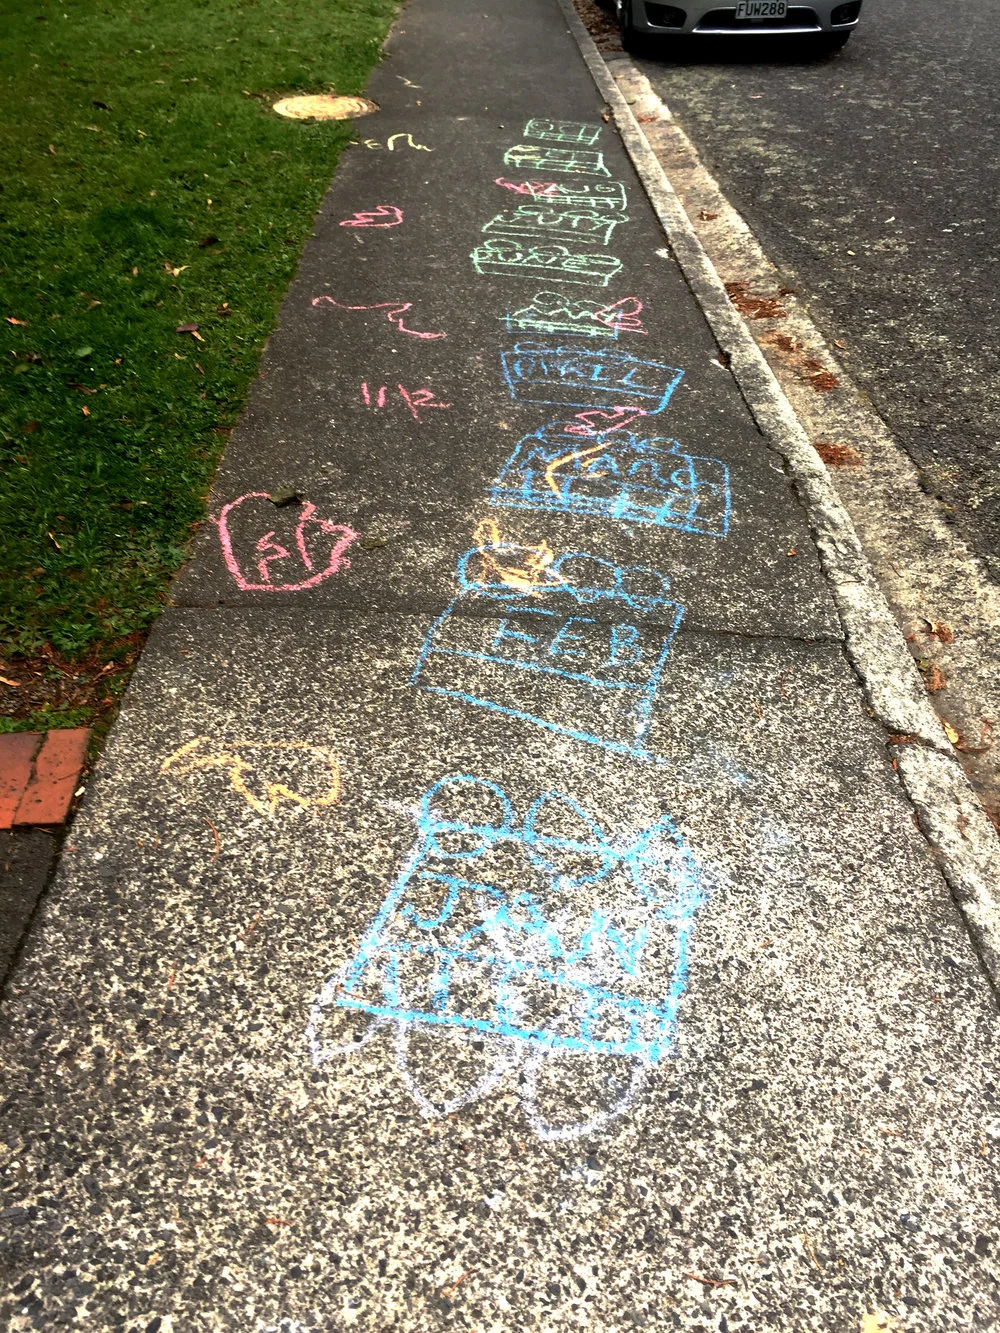 Pavement hopscotch lockdown image (with calendar months), Pinehaven